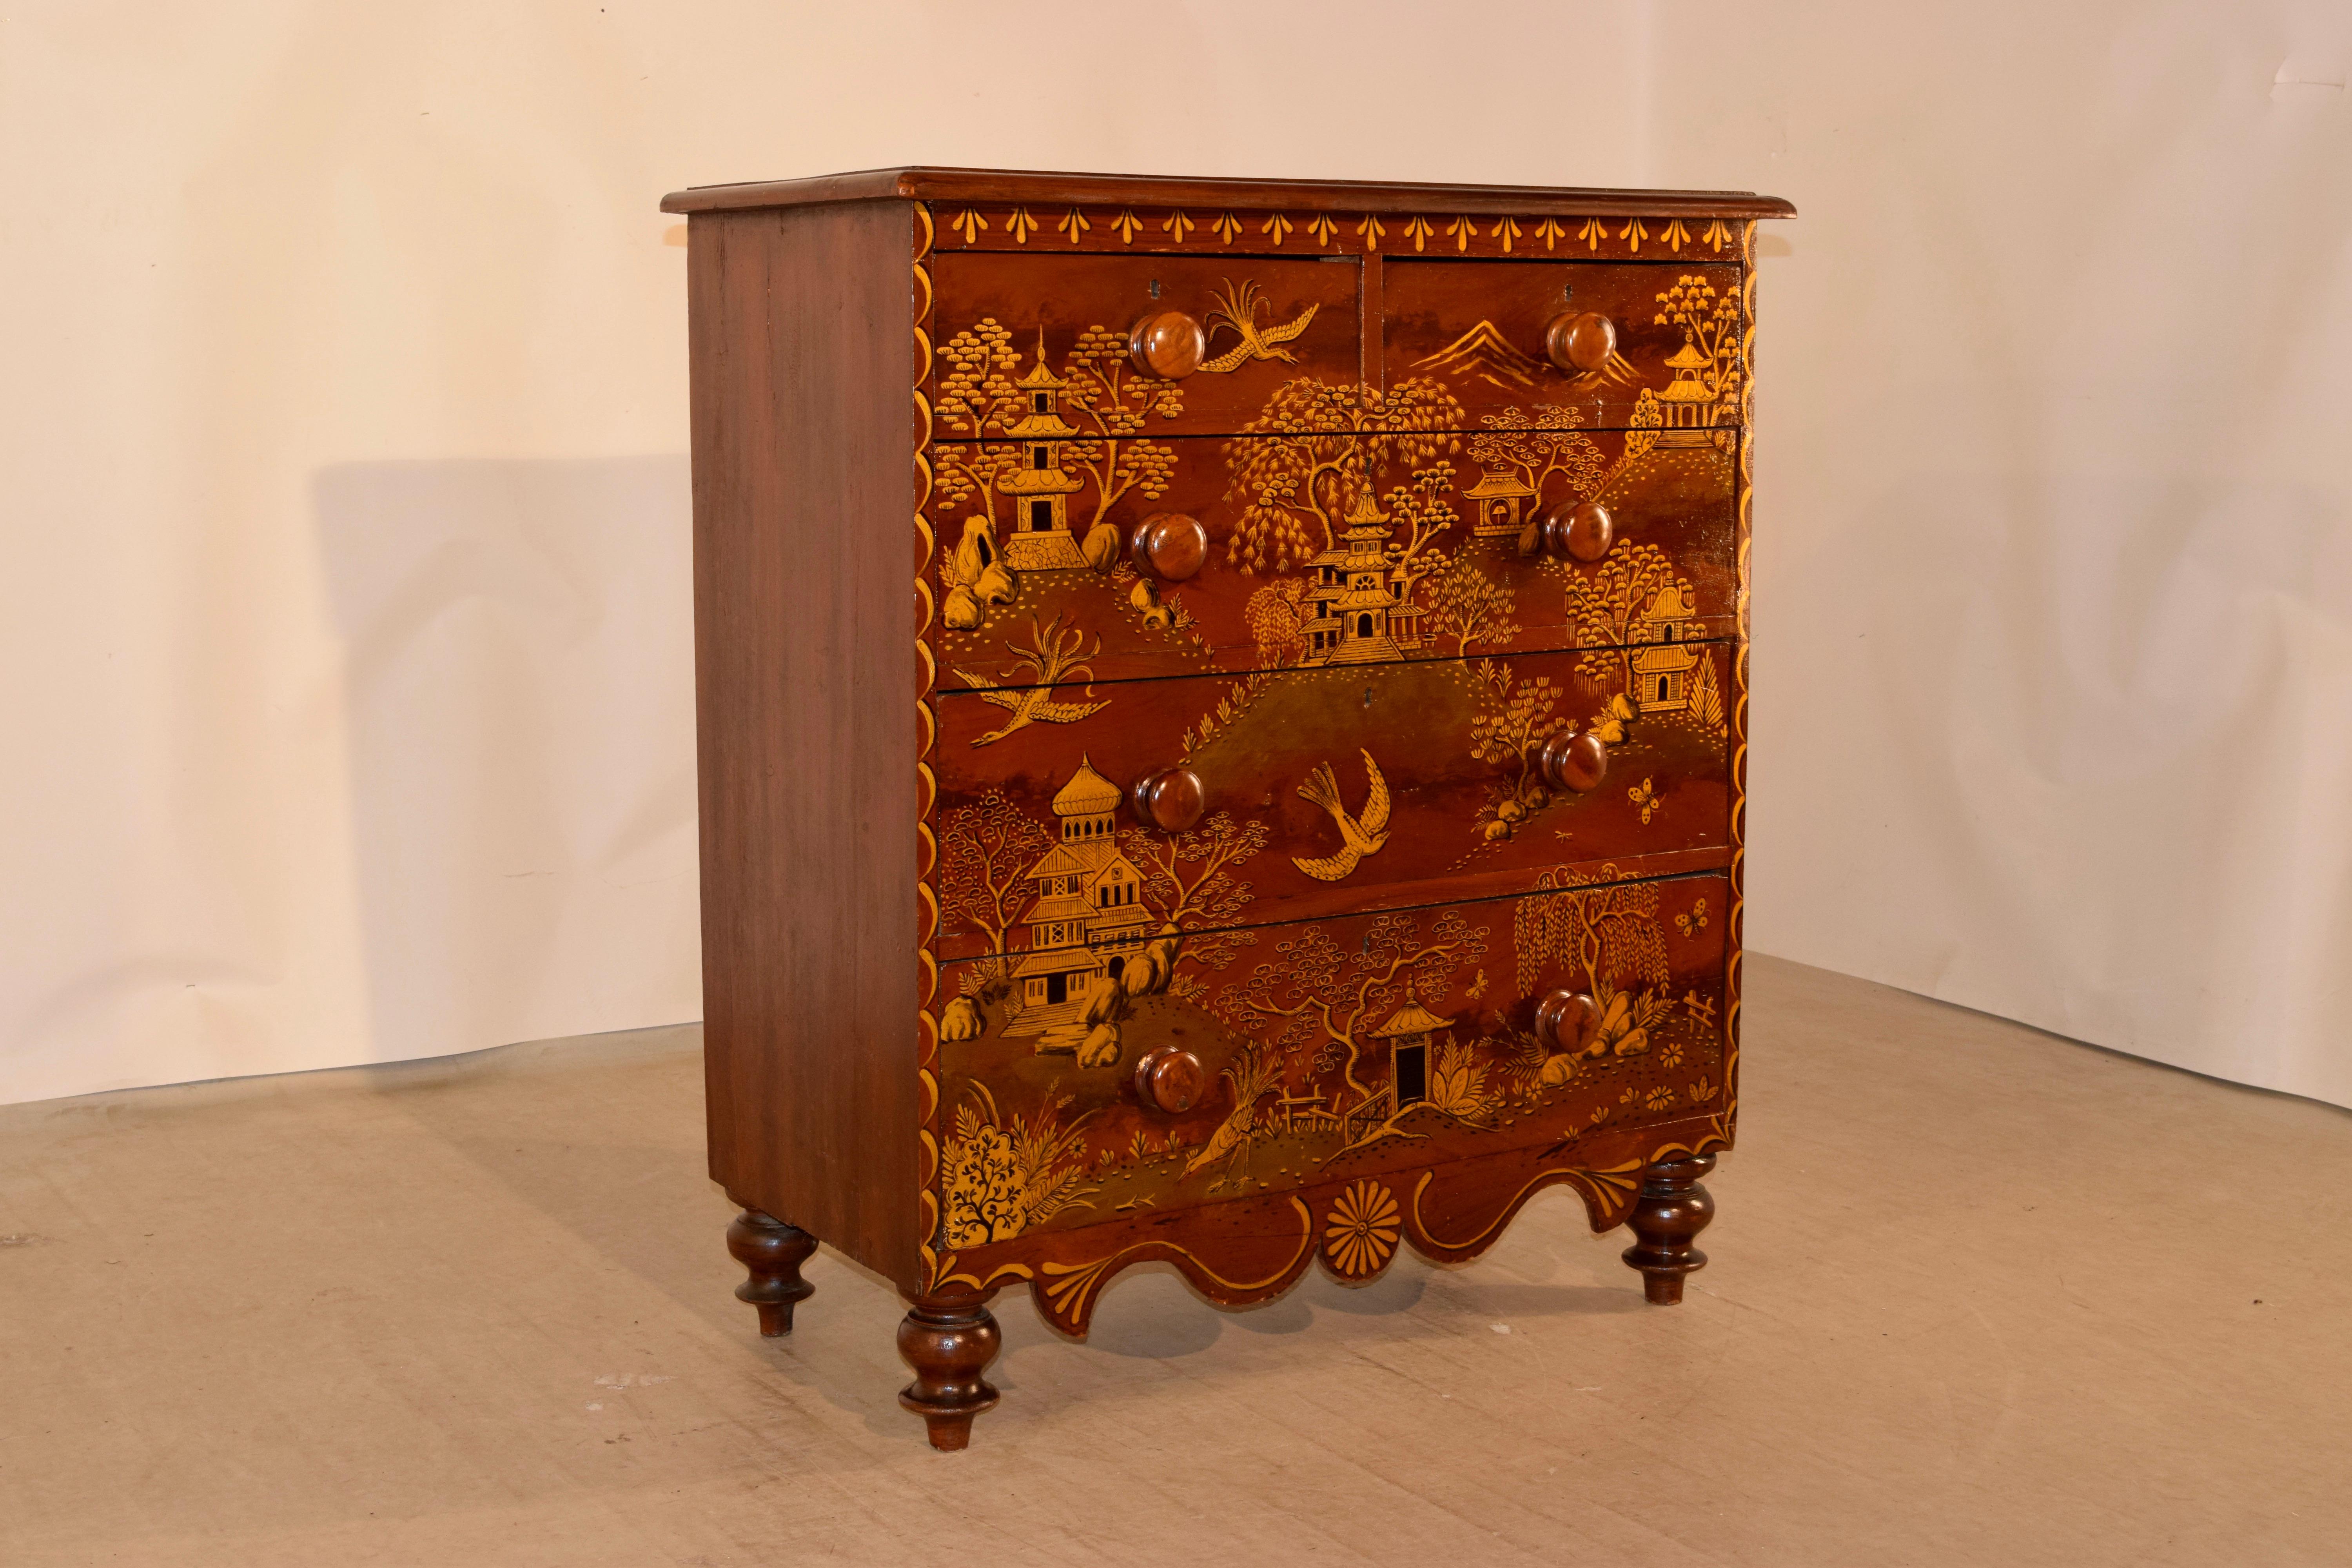 19th century pine chest of drawers from England with a beveled edge around the top, following down to two over three-drawer configuration. The front of the piece is hand painted with wonderful chinoiserie decoration. The sides are simple and the